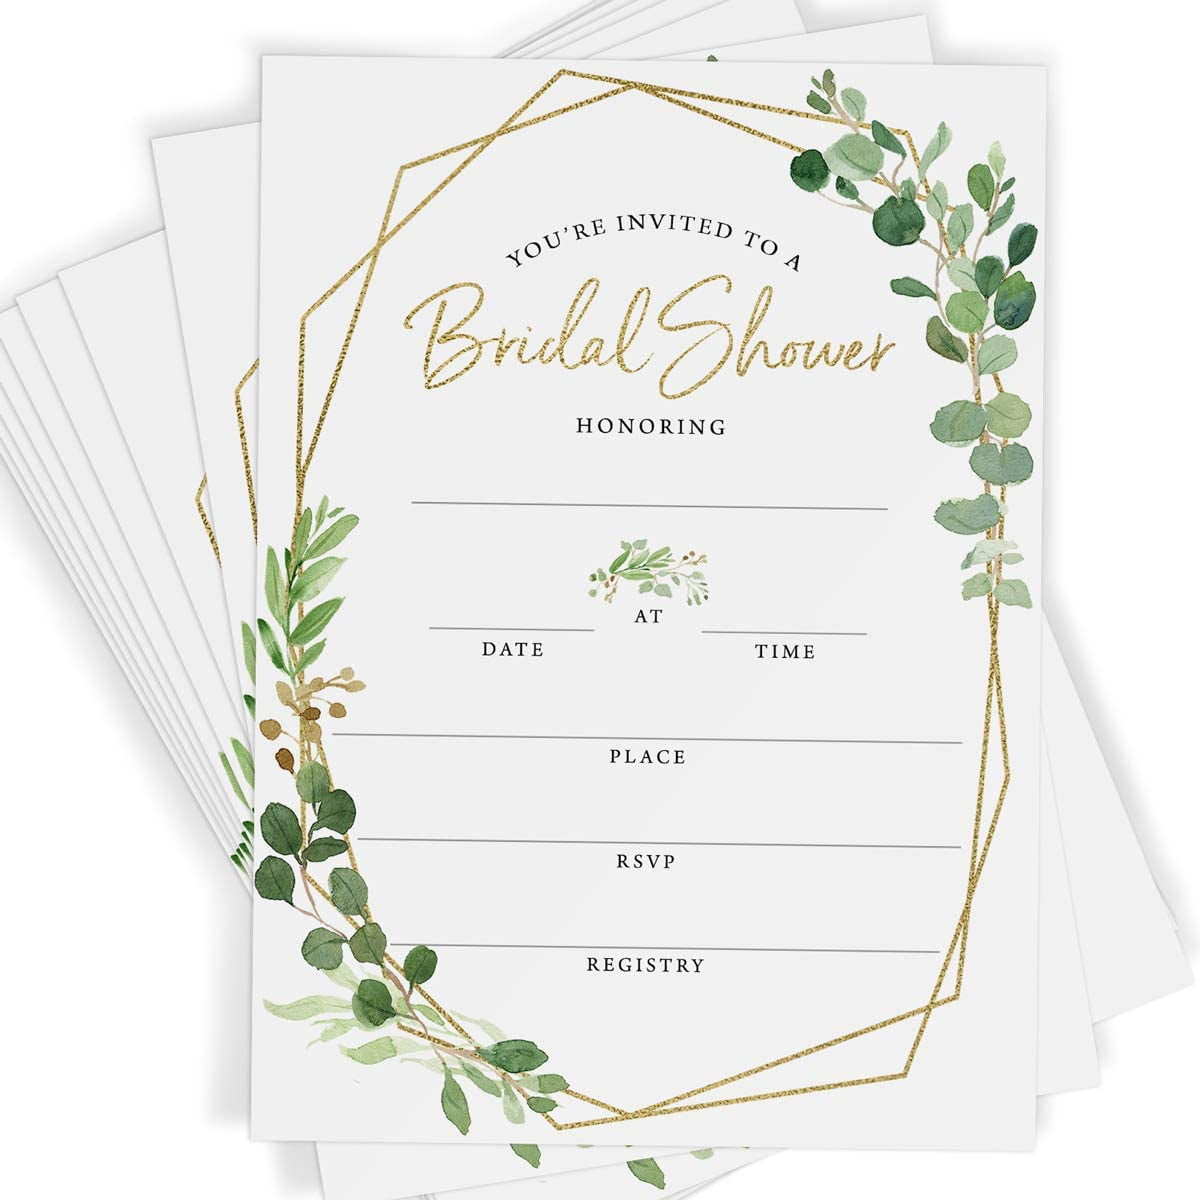 & Anniversary Birch Tree Bark Fill-in Party Invitations and Envelopes Baby Shower Birthday Party Set of 25 Rustic Country Invites Bridal Shower Rehearsal Dinner All Occasions 